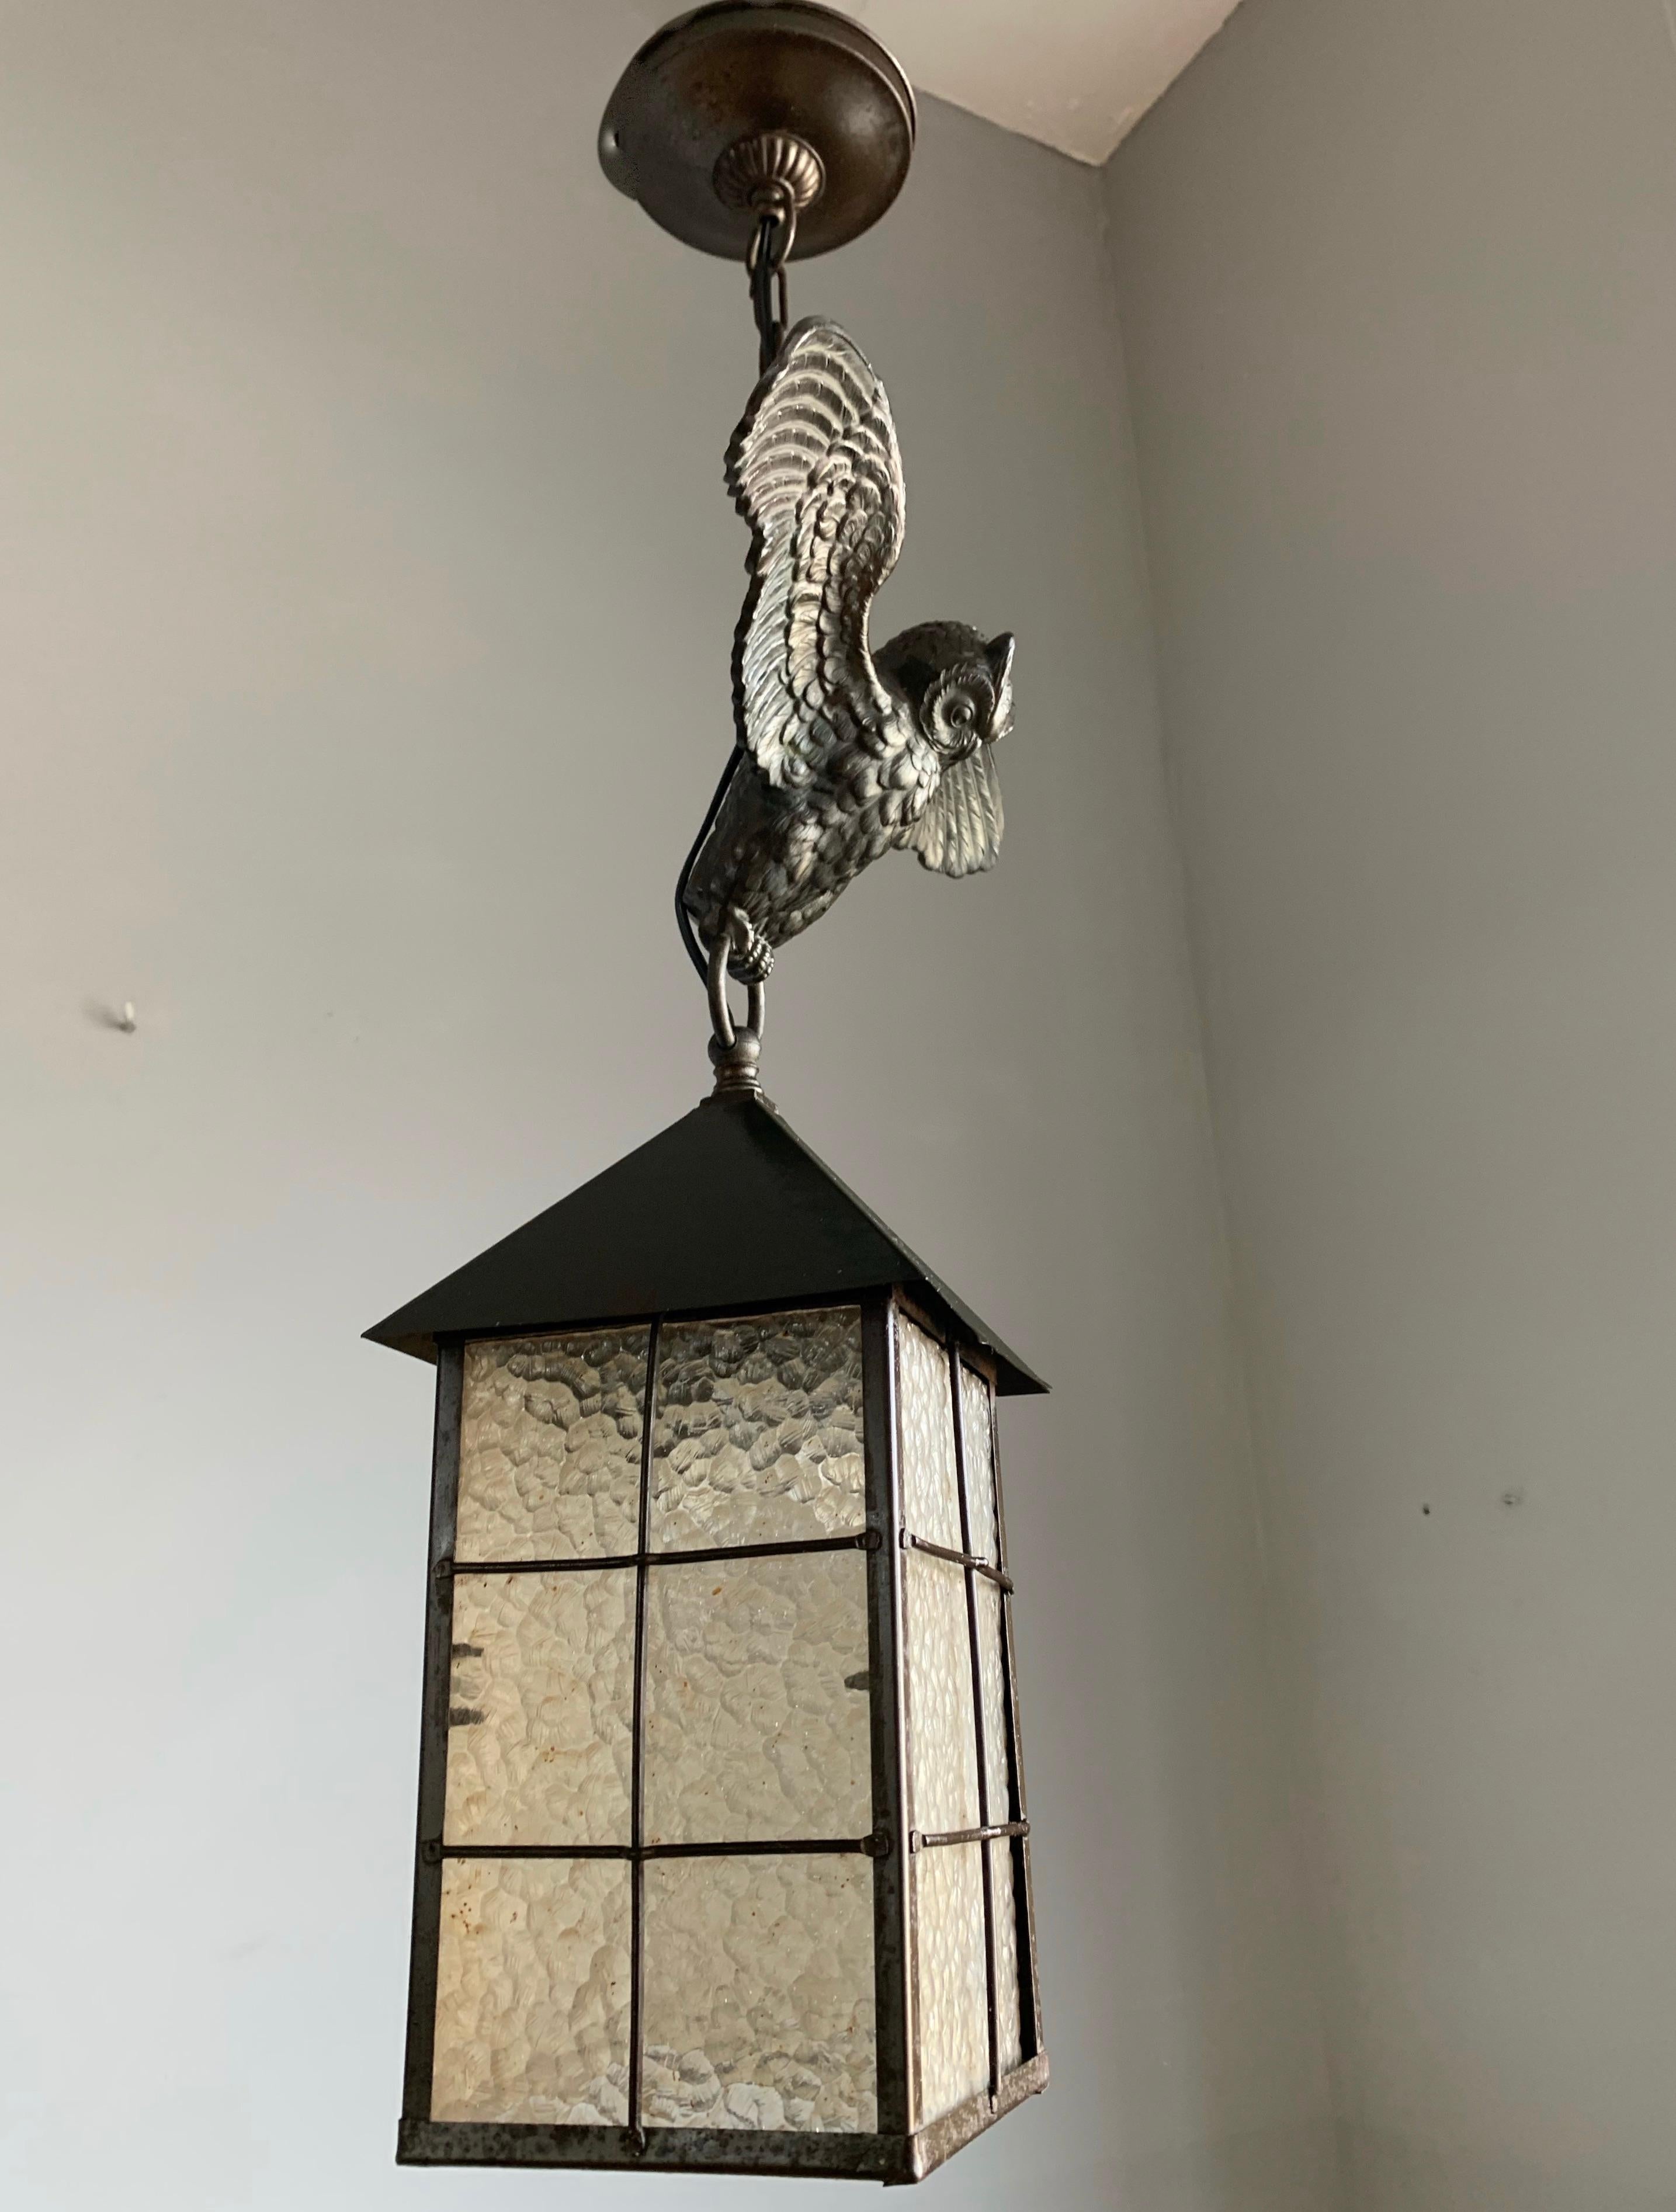 20th Century Arts and Crafts Bronze Owl Sculpture Pendant Light with Cathedral Glass Lantern